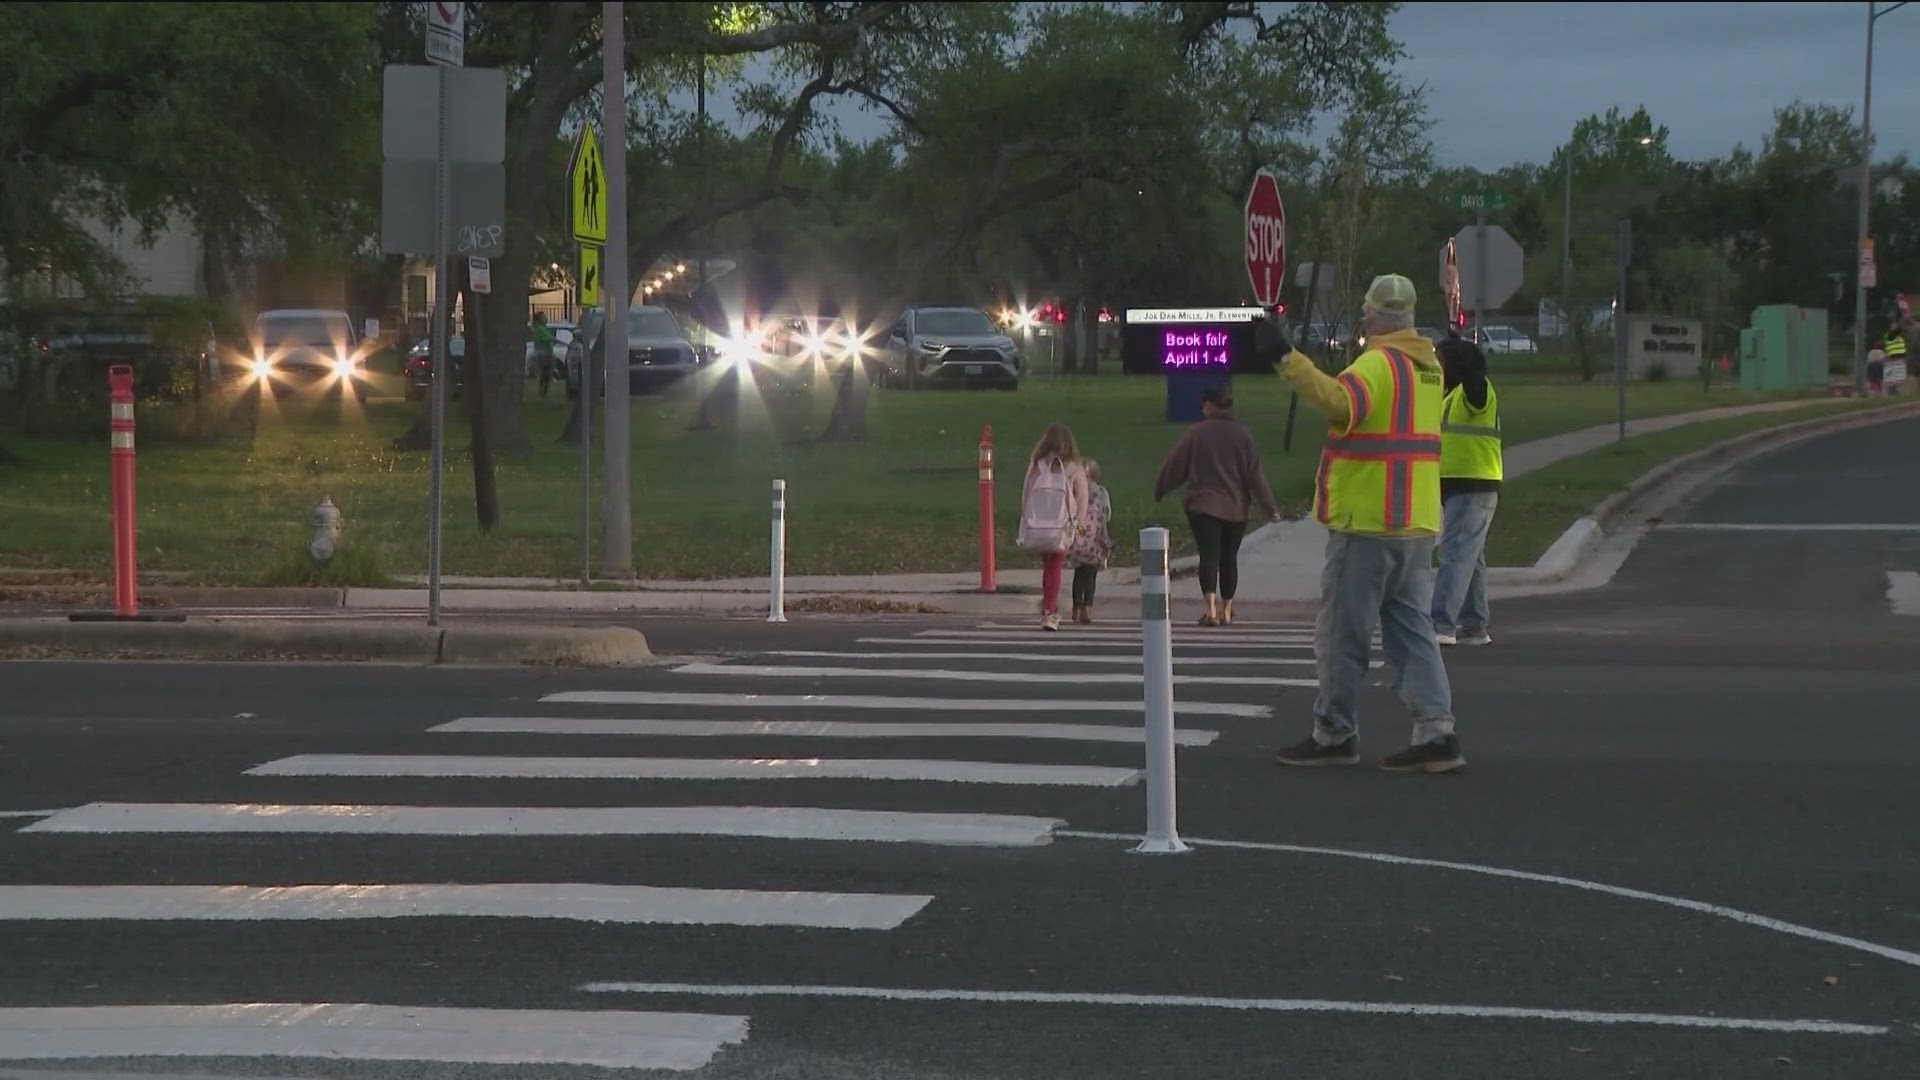 Some Austin parents argue the new changes have added extra traffic congestion.